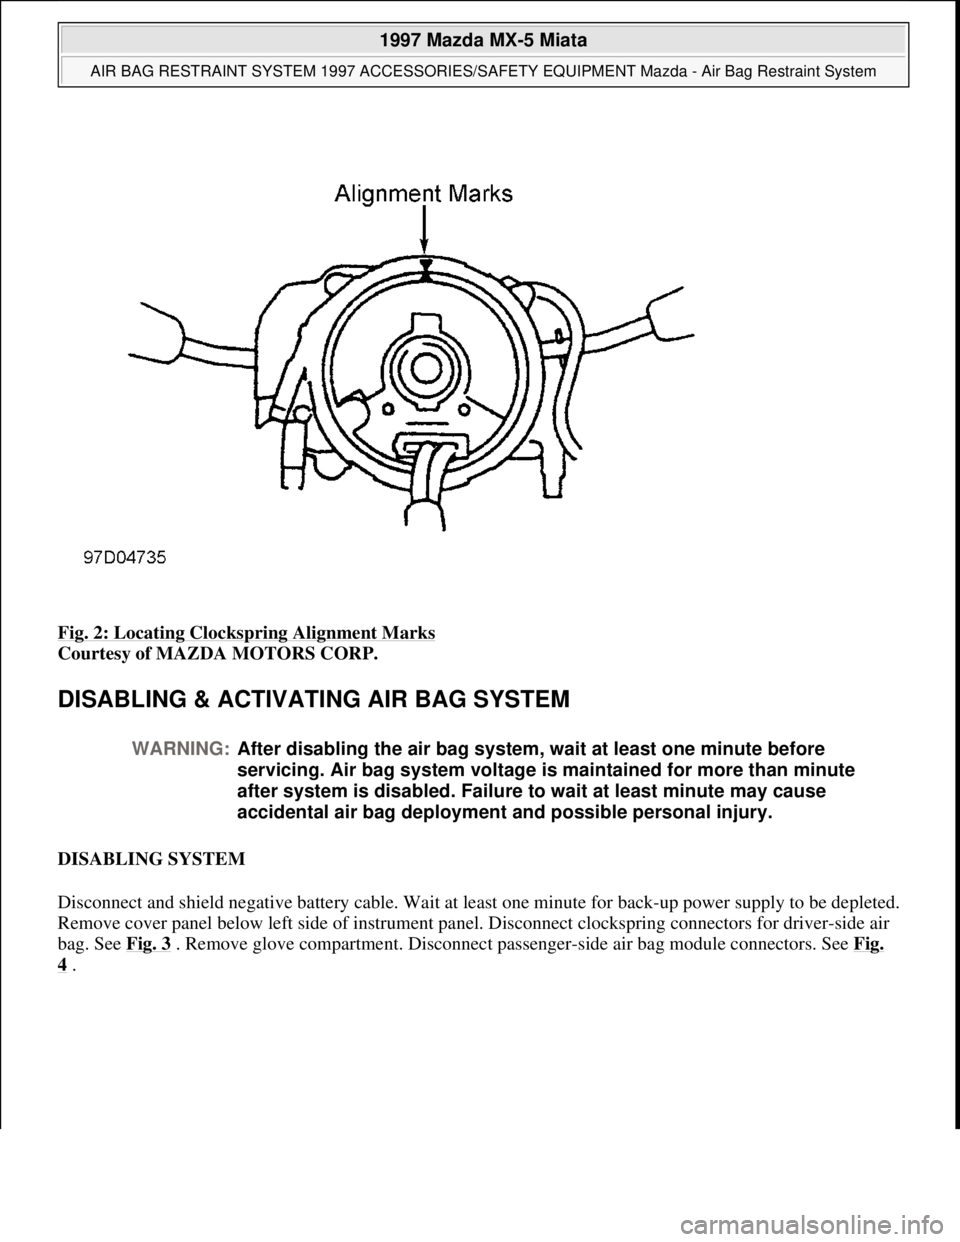 MAZDA MX-5 1997  Factory Repair Manual Fig. 2: Locating Clockspring Alignment Marks 
Courtesy of MAZDA MOTORS CORP.  
DISABLING & ACTIVATING AIR BAG SYSTEM 
DISABLING SYSTEM 
Disconnect and shield negative battery cable. Wait at least one 